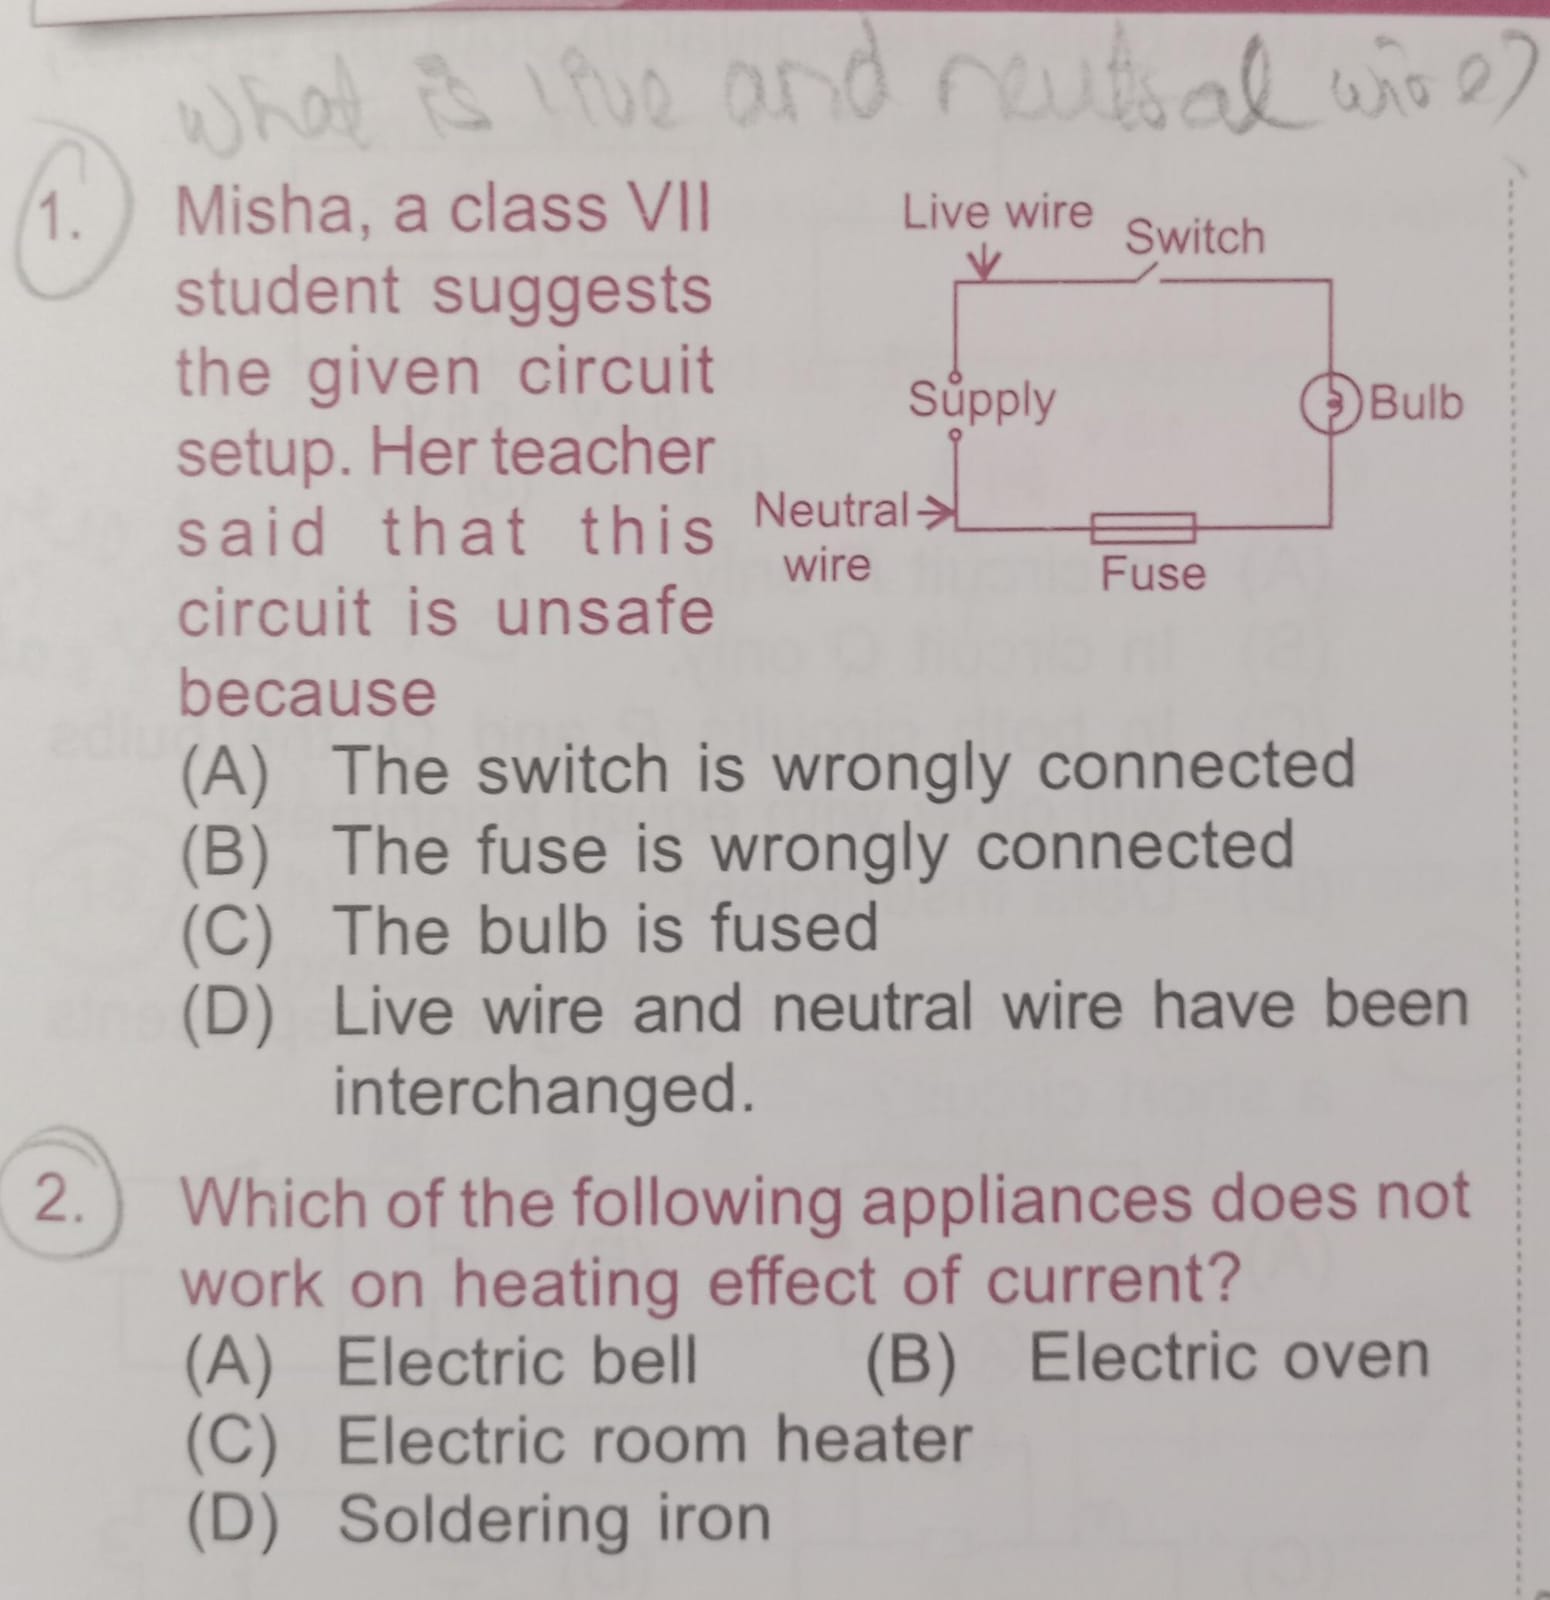 Which of the following appliances does not work on heating effect of c